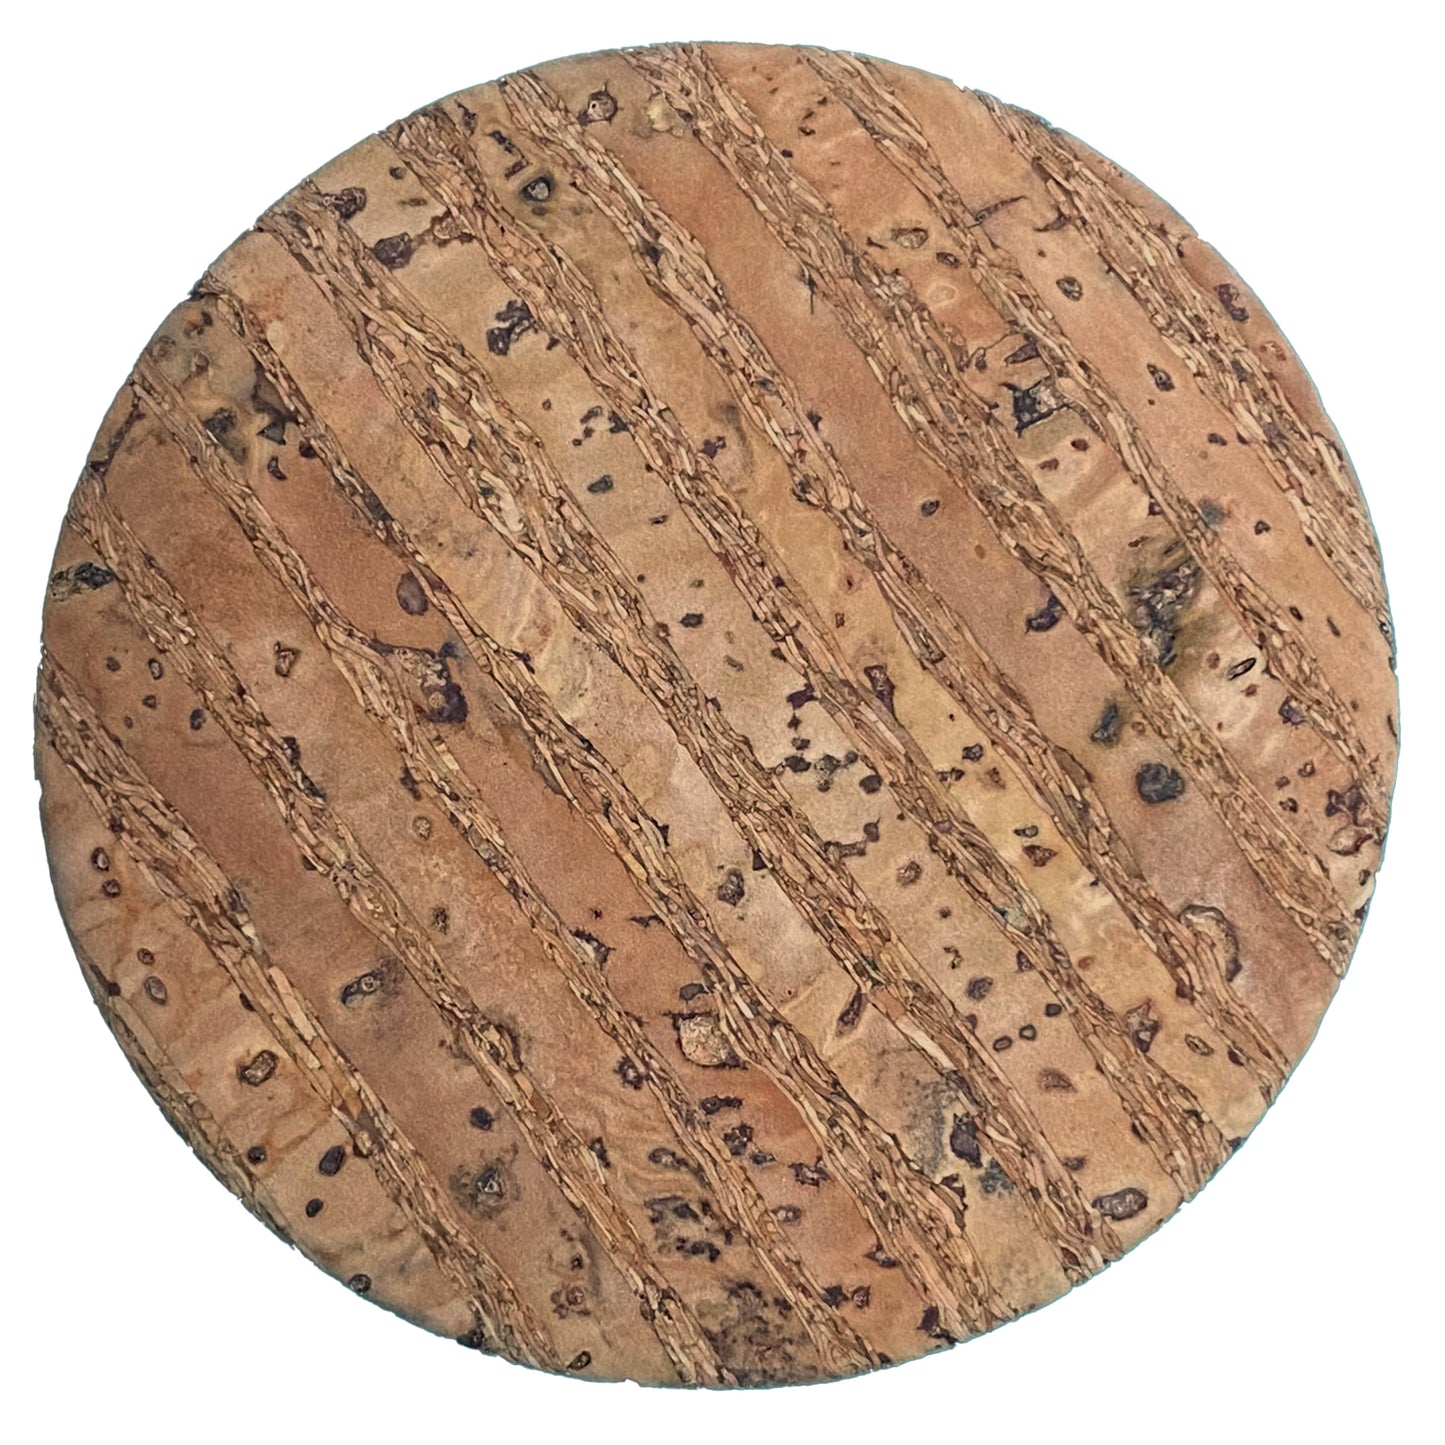 Cork Buttons 2 Inch Large - Natural 94 One Piece Card BCB-94L